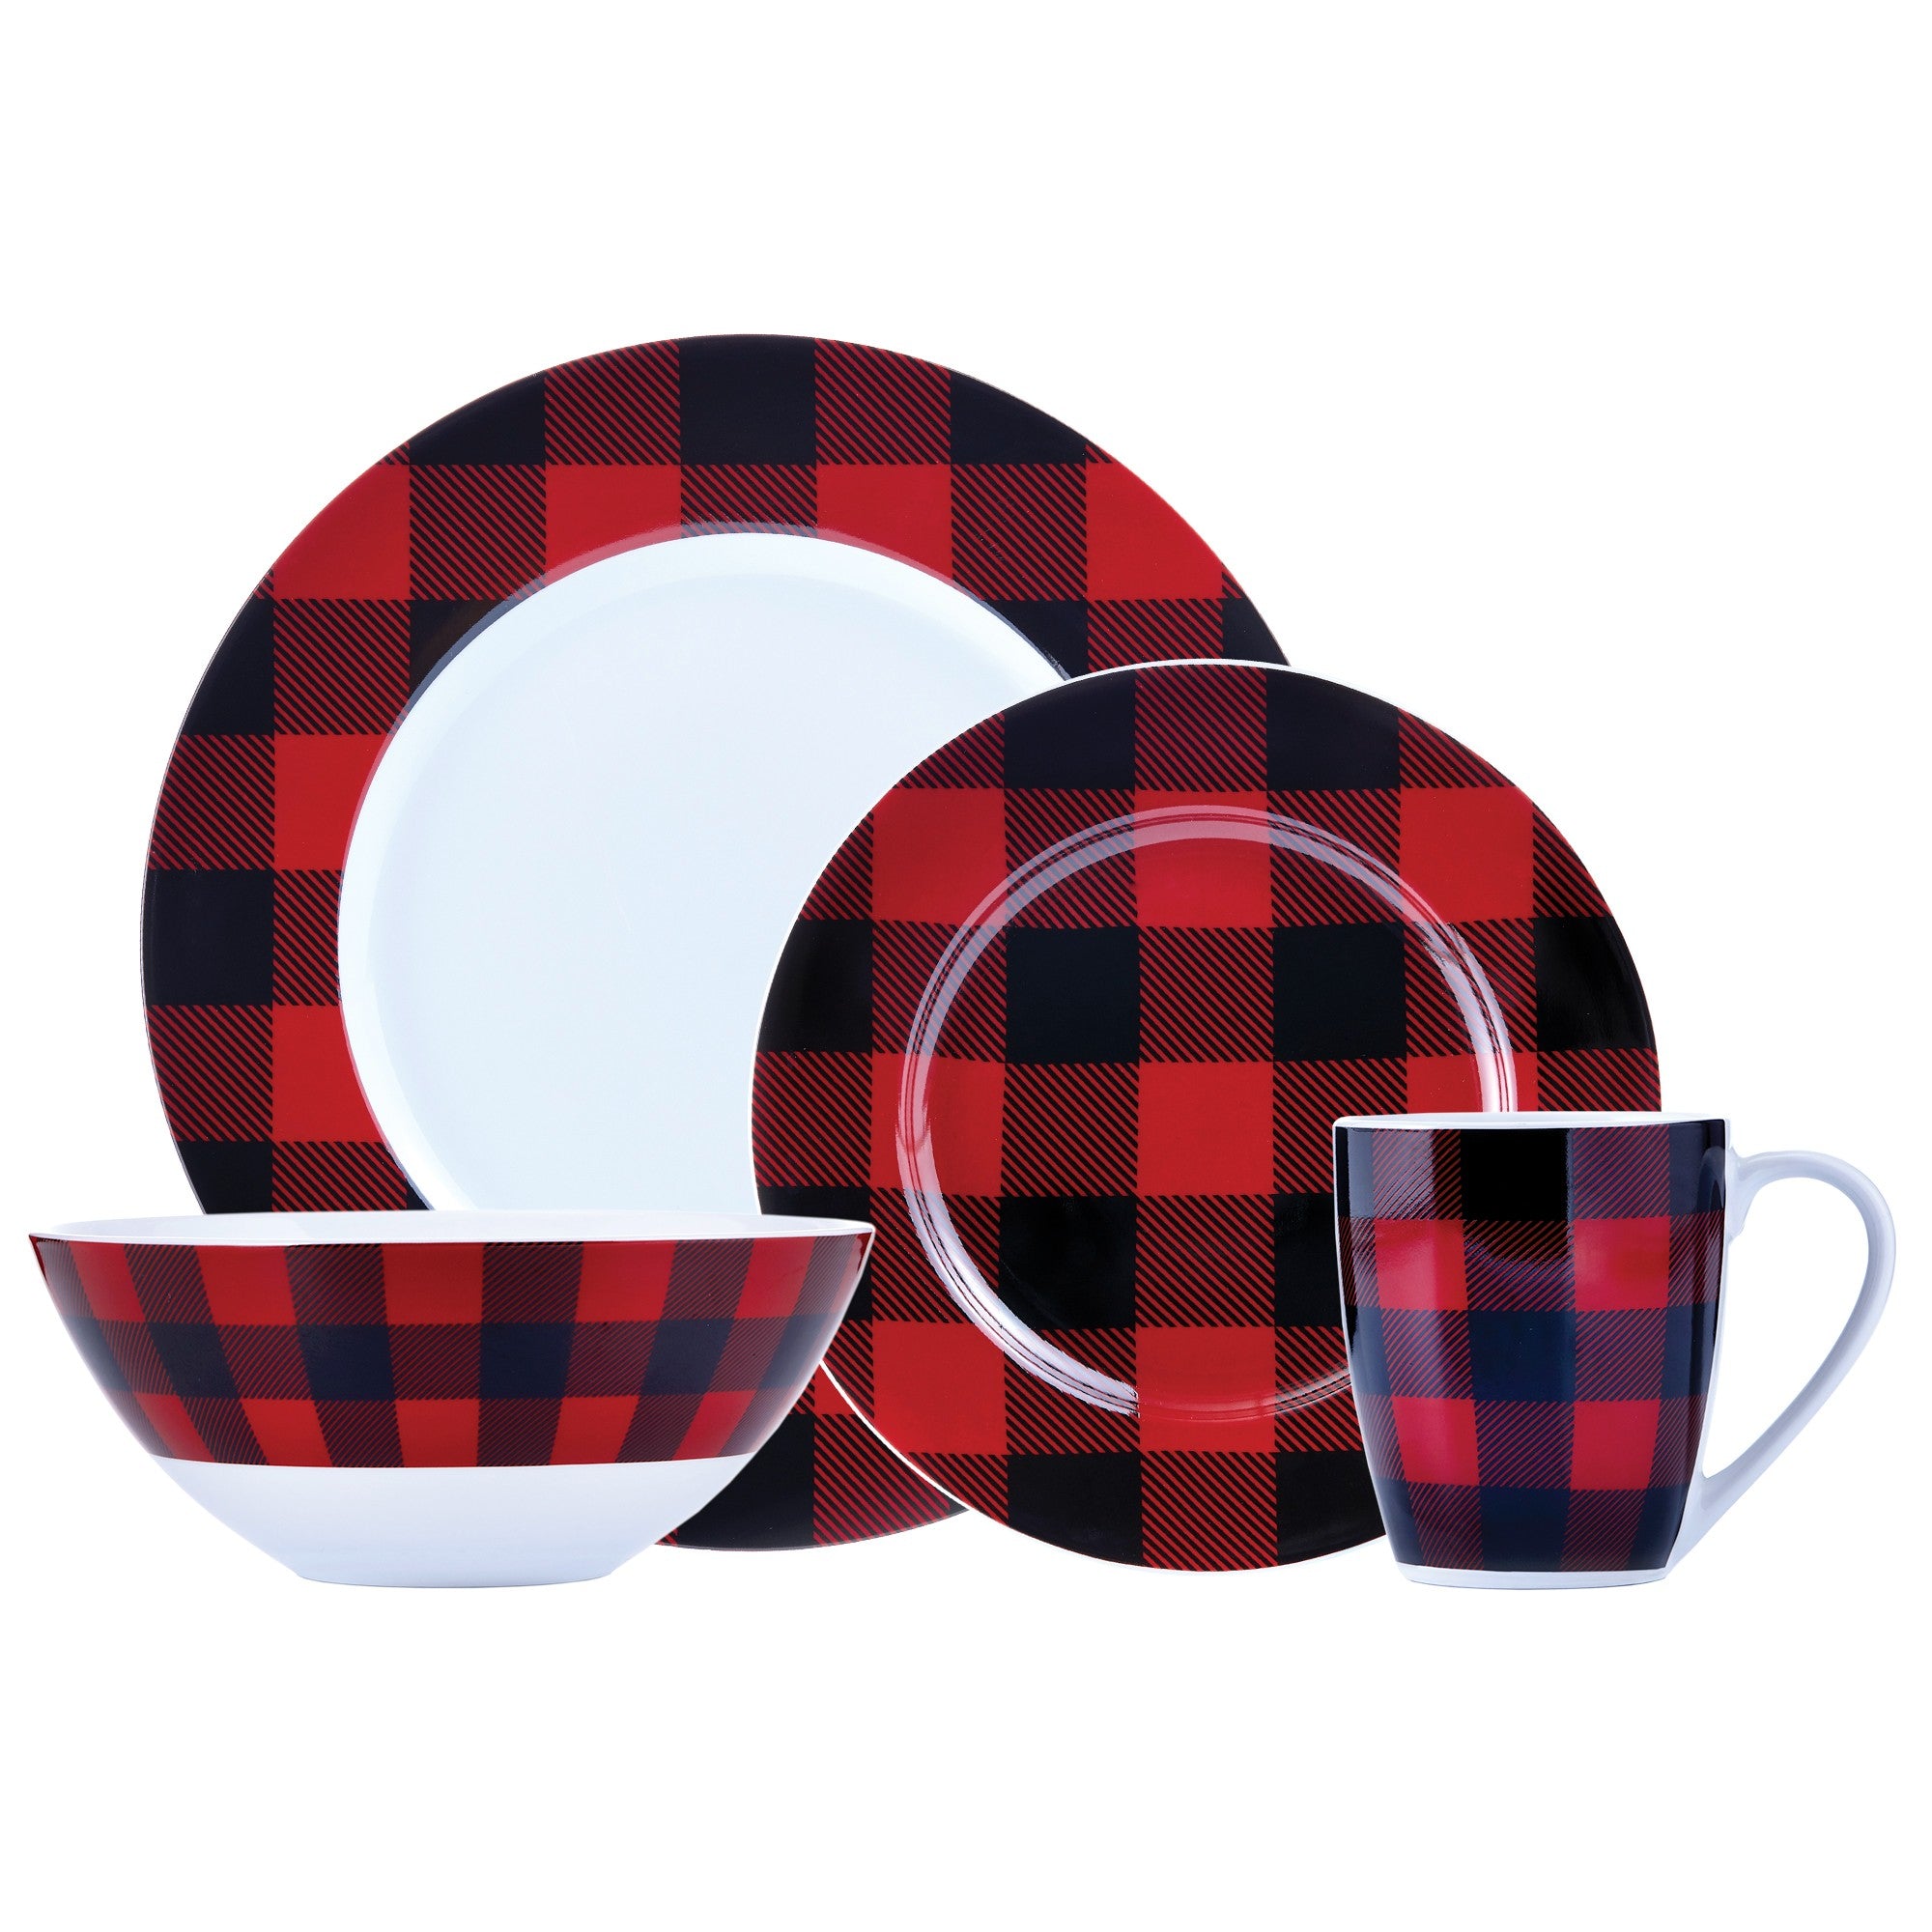 title:Safdie & Co. Dinnerset 16PC Buffalo Plaid Red/Black;color:Red